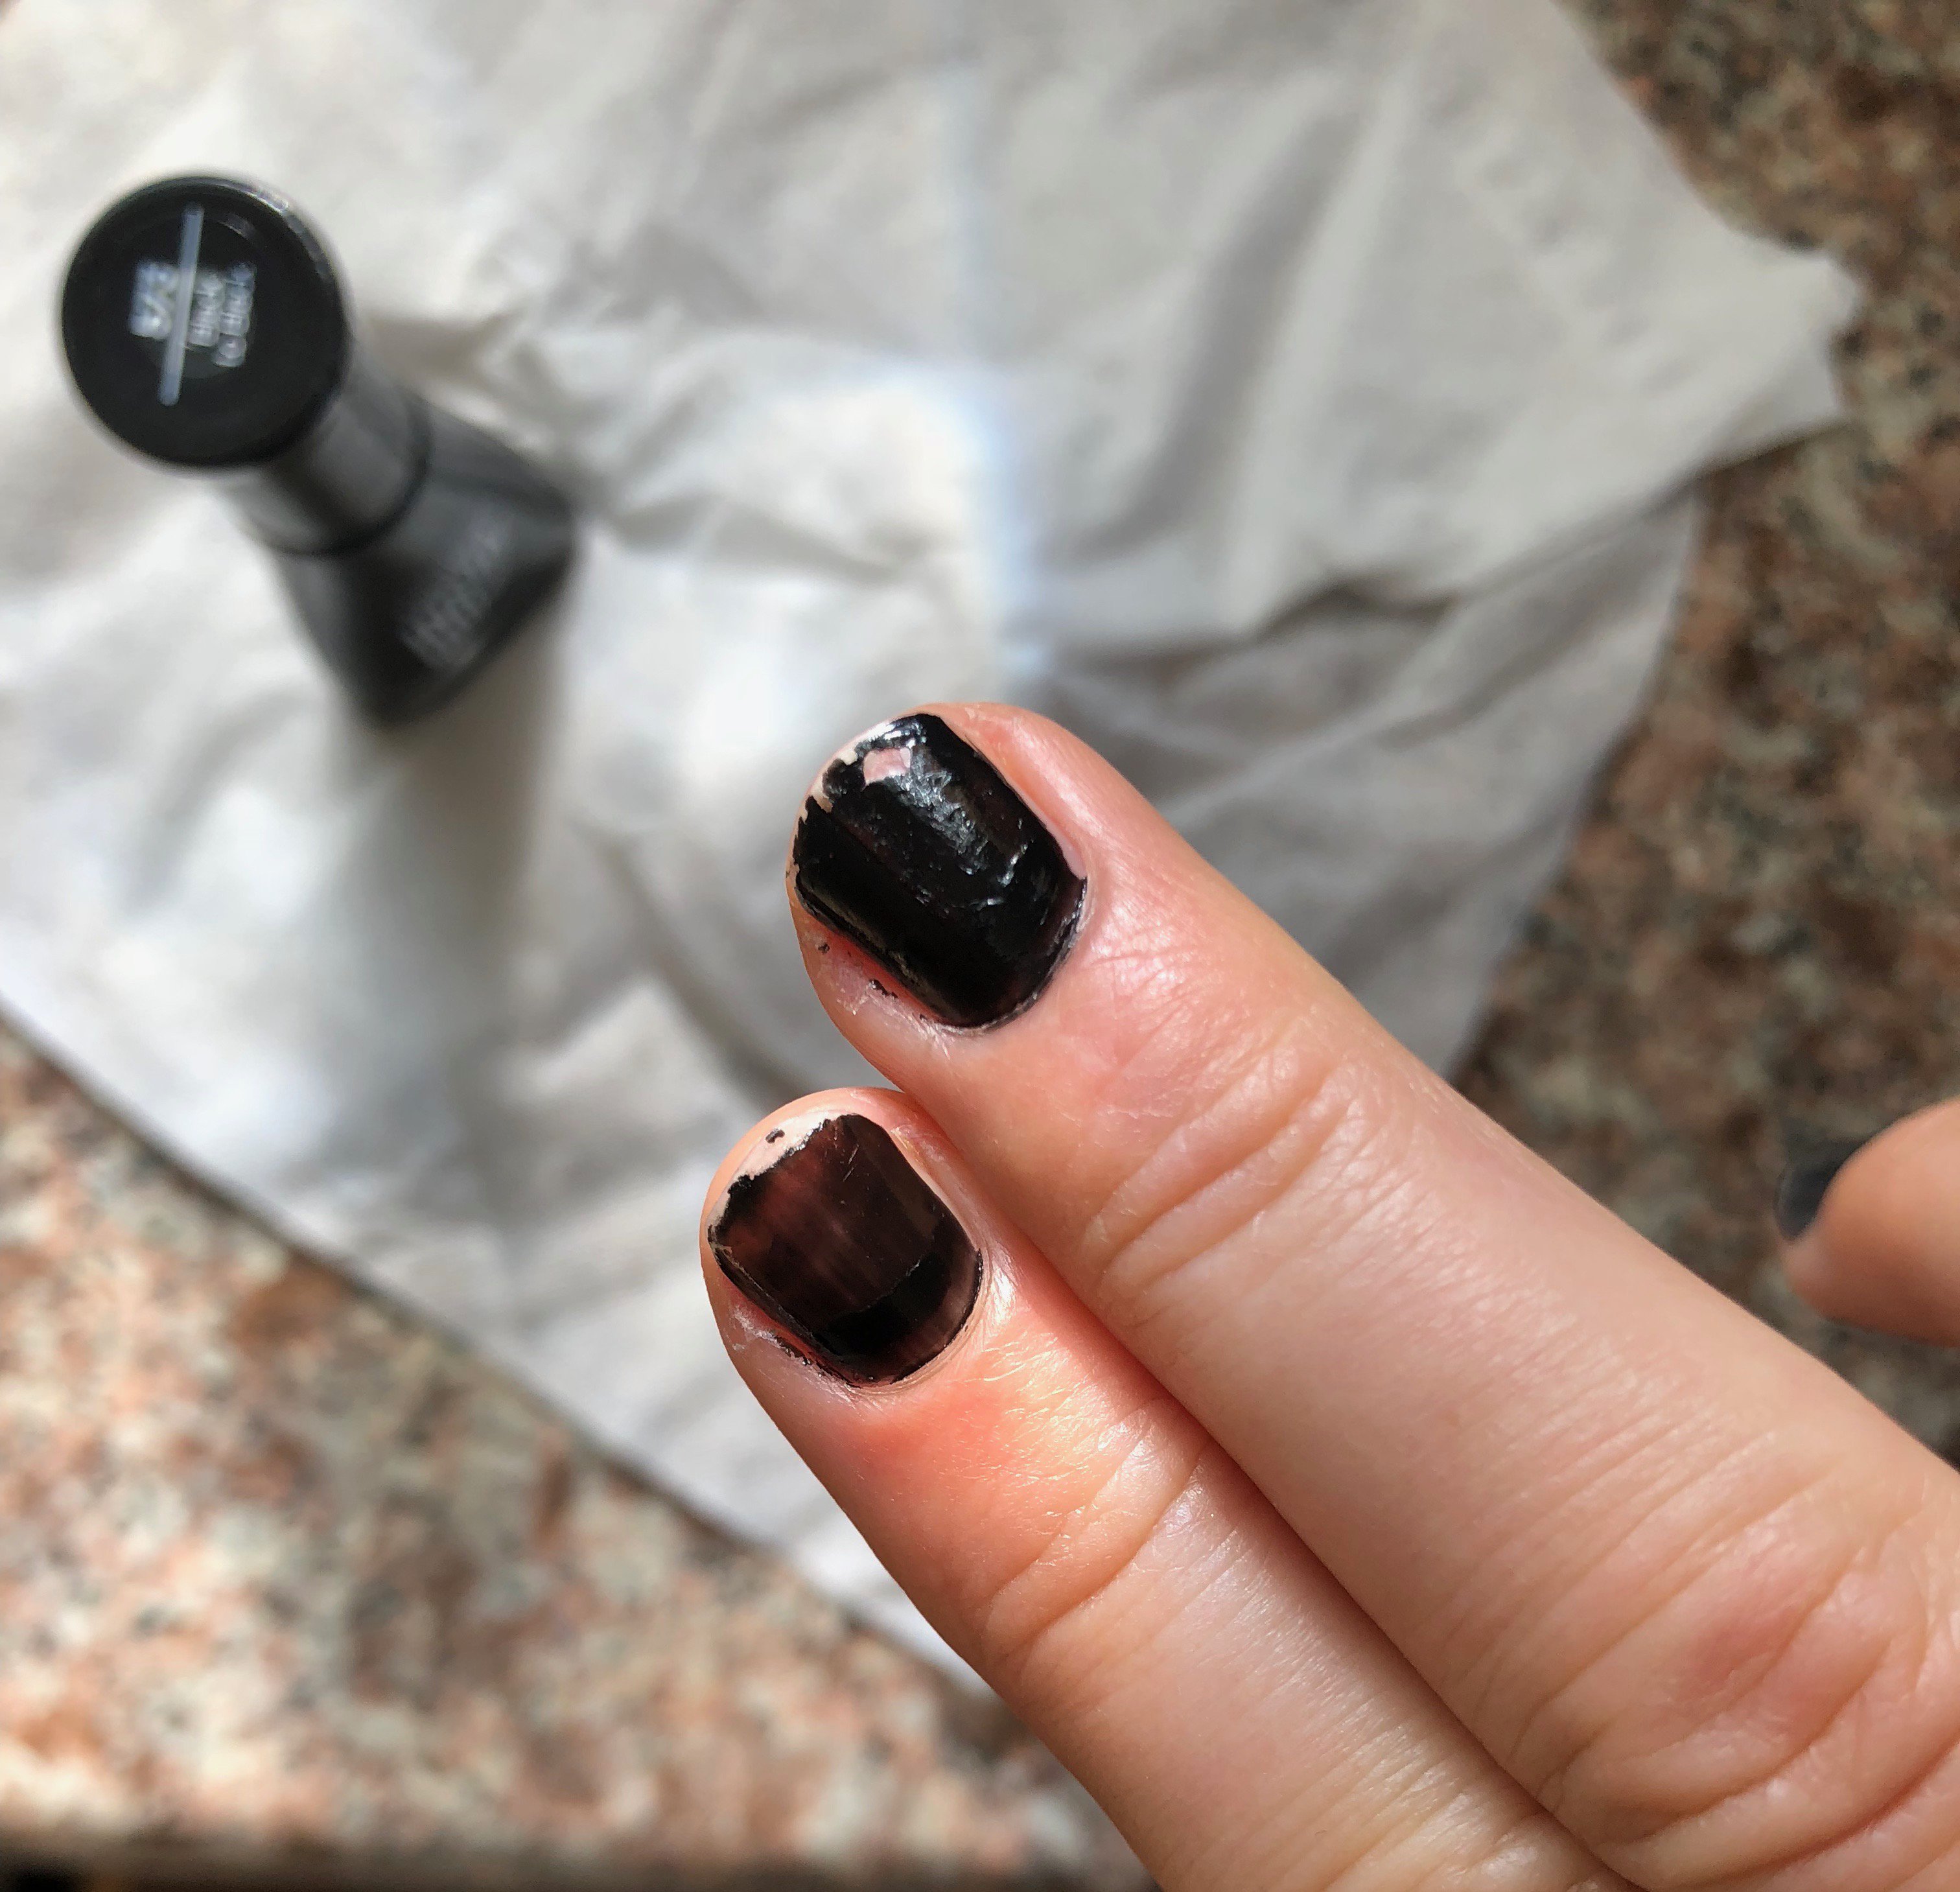 Dianna Cowern auf X: „Here are my nails. My nail-doing skills are their own  failure friday. #FailureFriday  / X